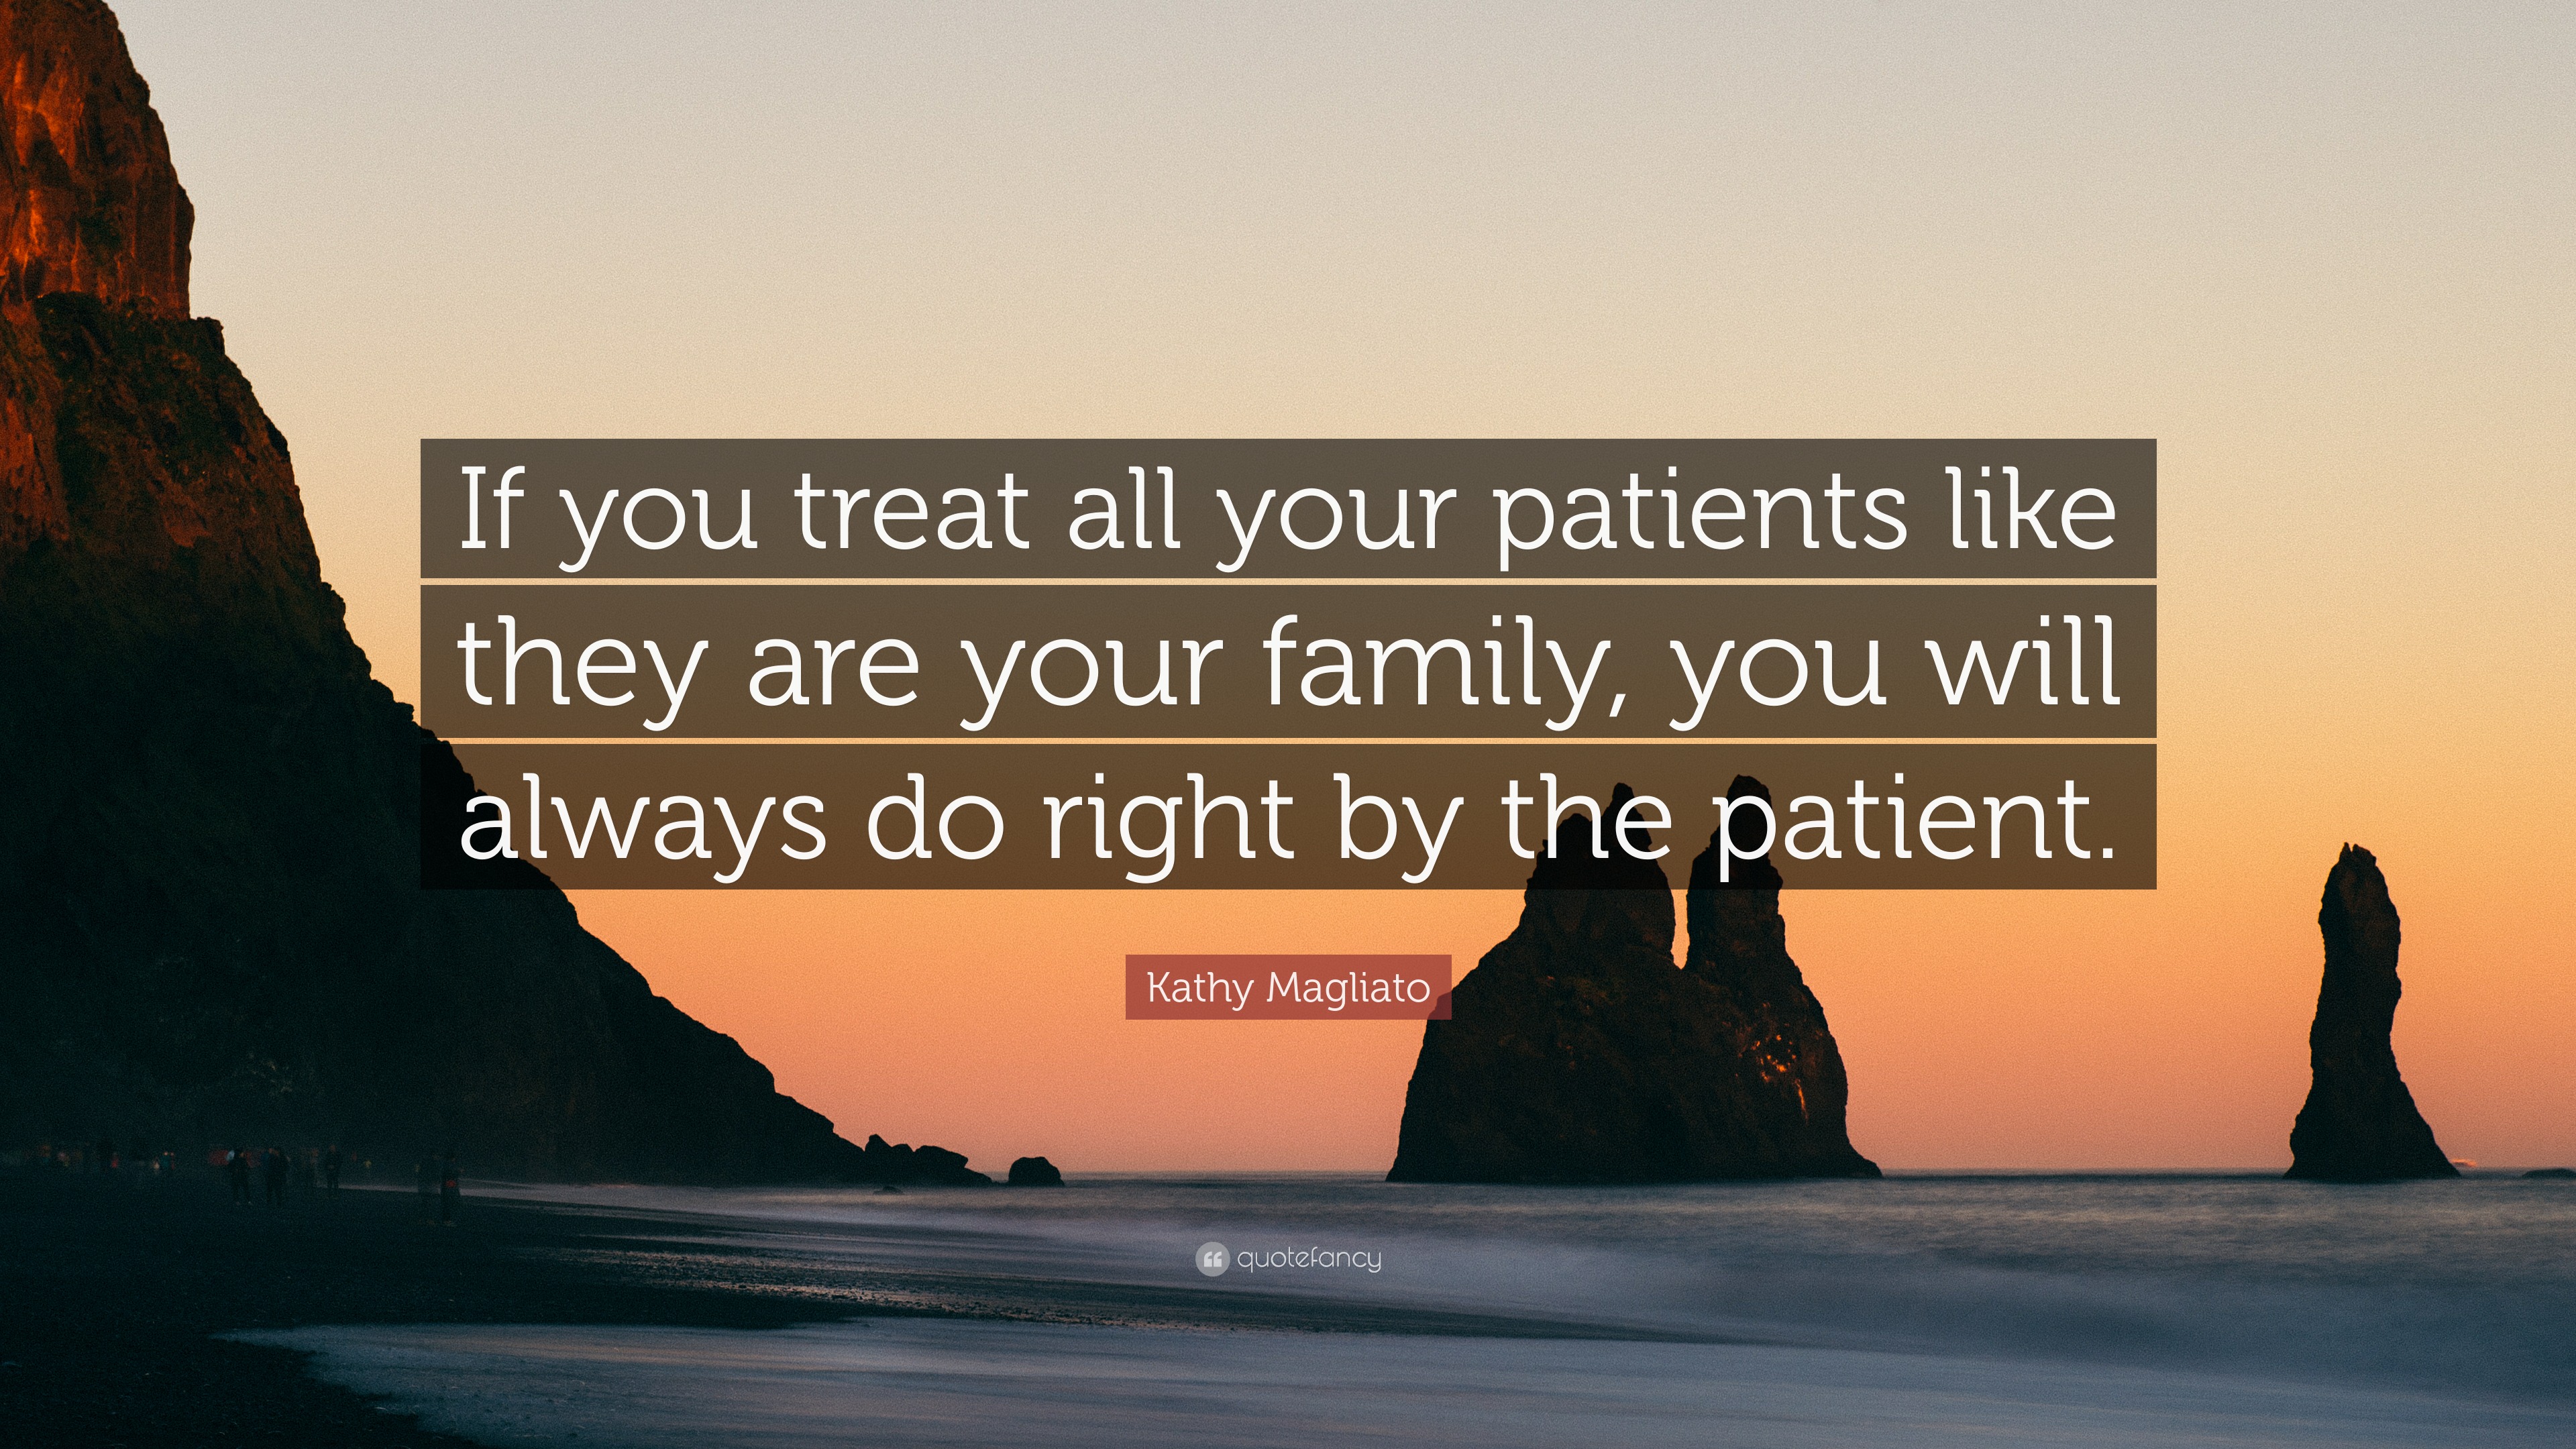 https://quotefancy.com/media/wallpaper/3840x2160/8035009-Kathy-Magliato-Quote-If-you-treat-all-your-patients-like-they-are.jpg